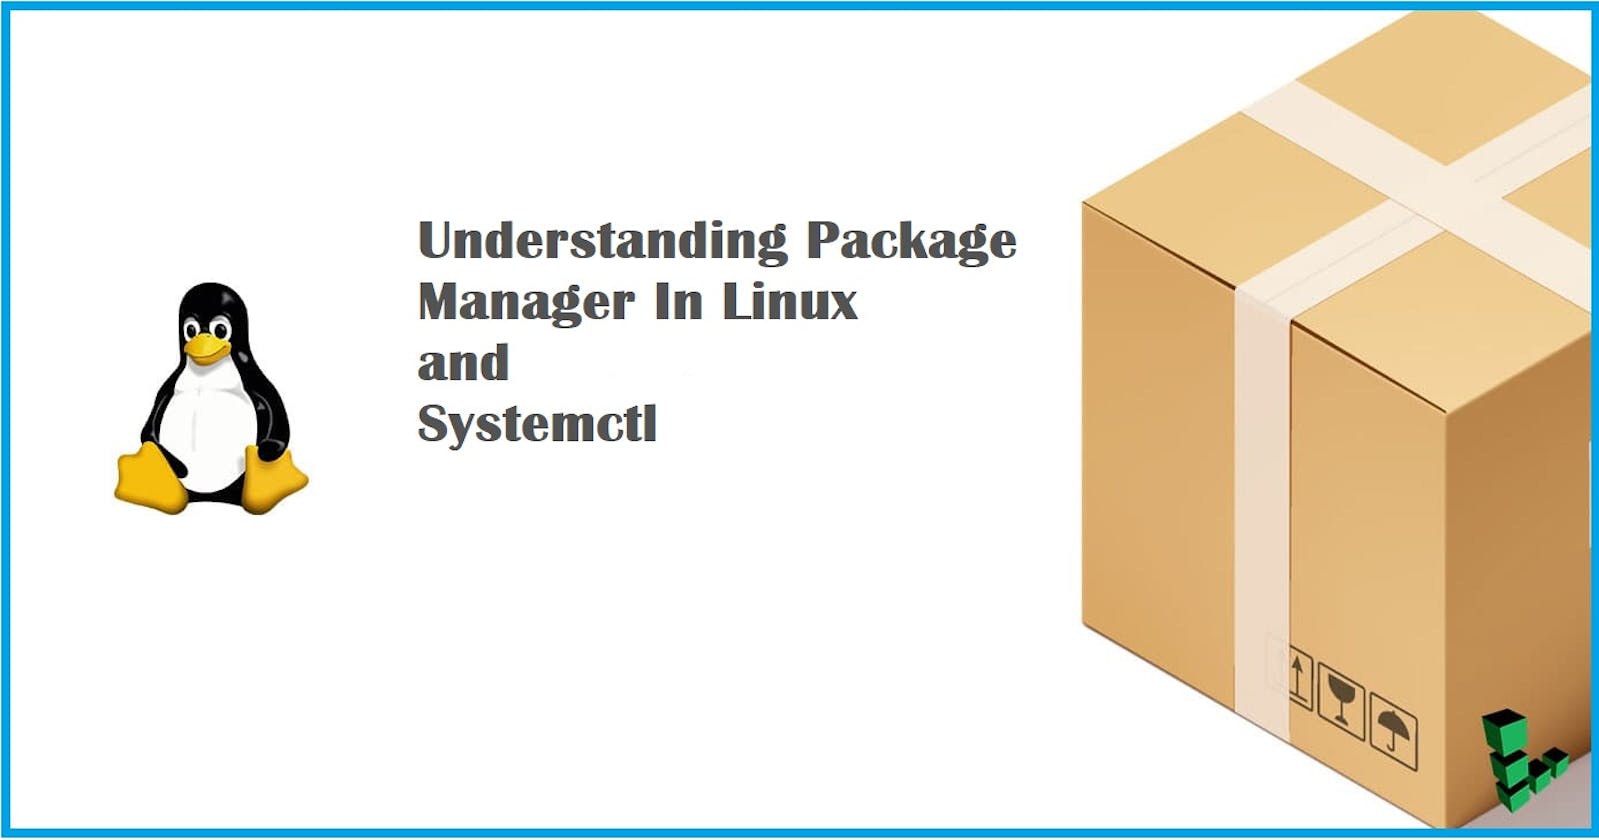 📂Day 7 - Understanding Package Manager and Systemctl